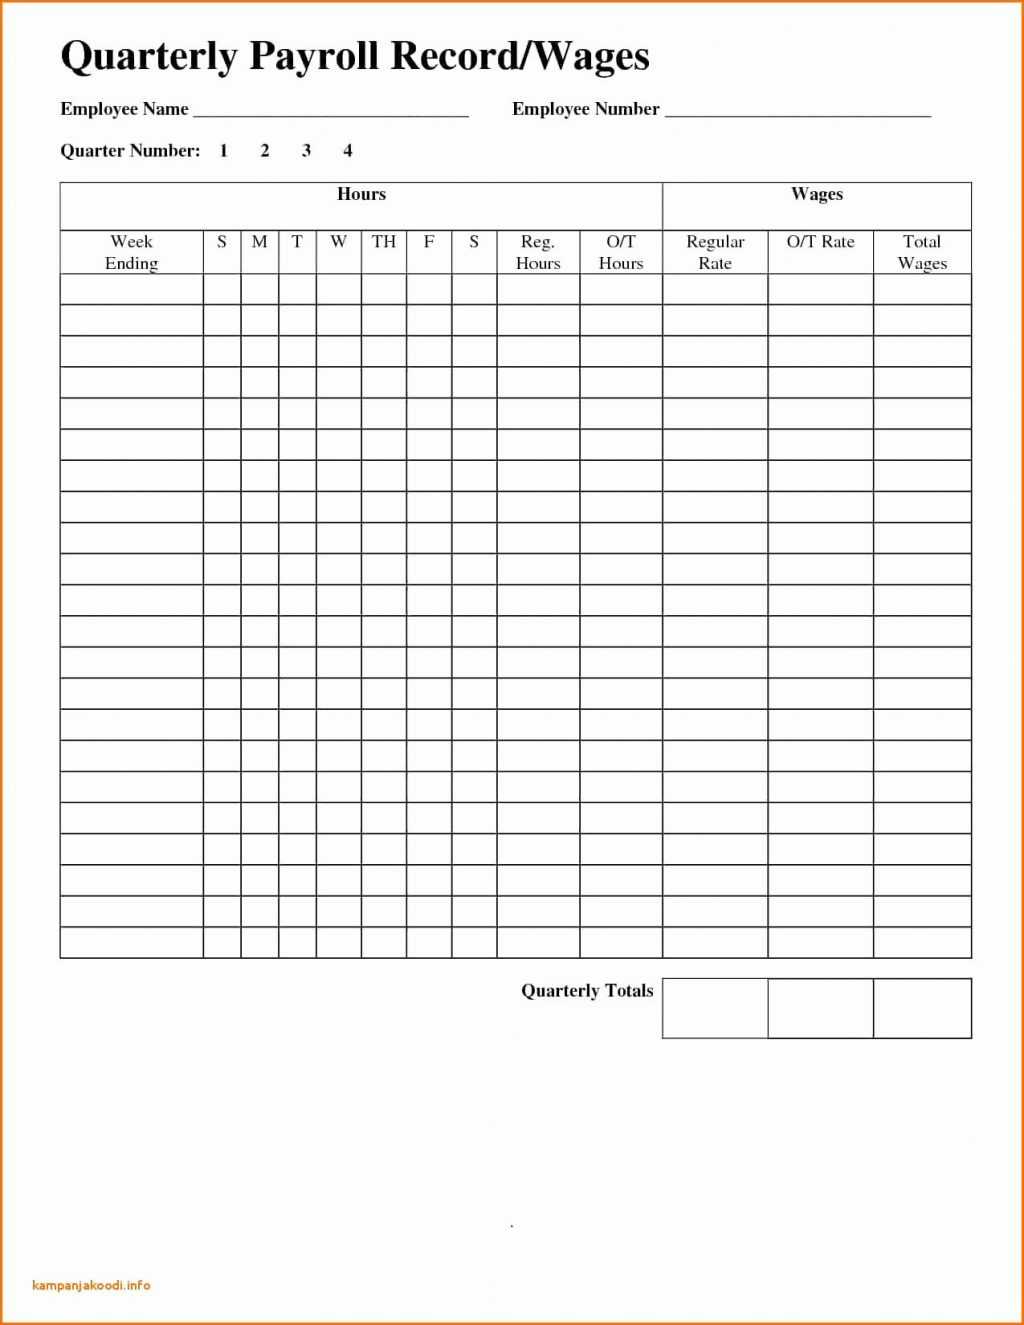 Tally Sheet Excel Emplate Beautiful Pipe Spreadsheet With Blank Ledger Template